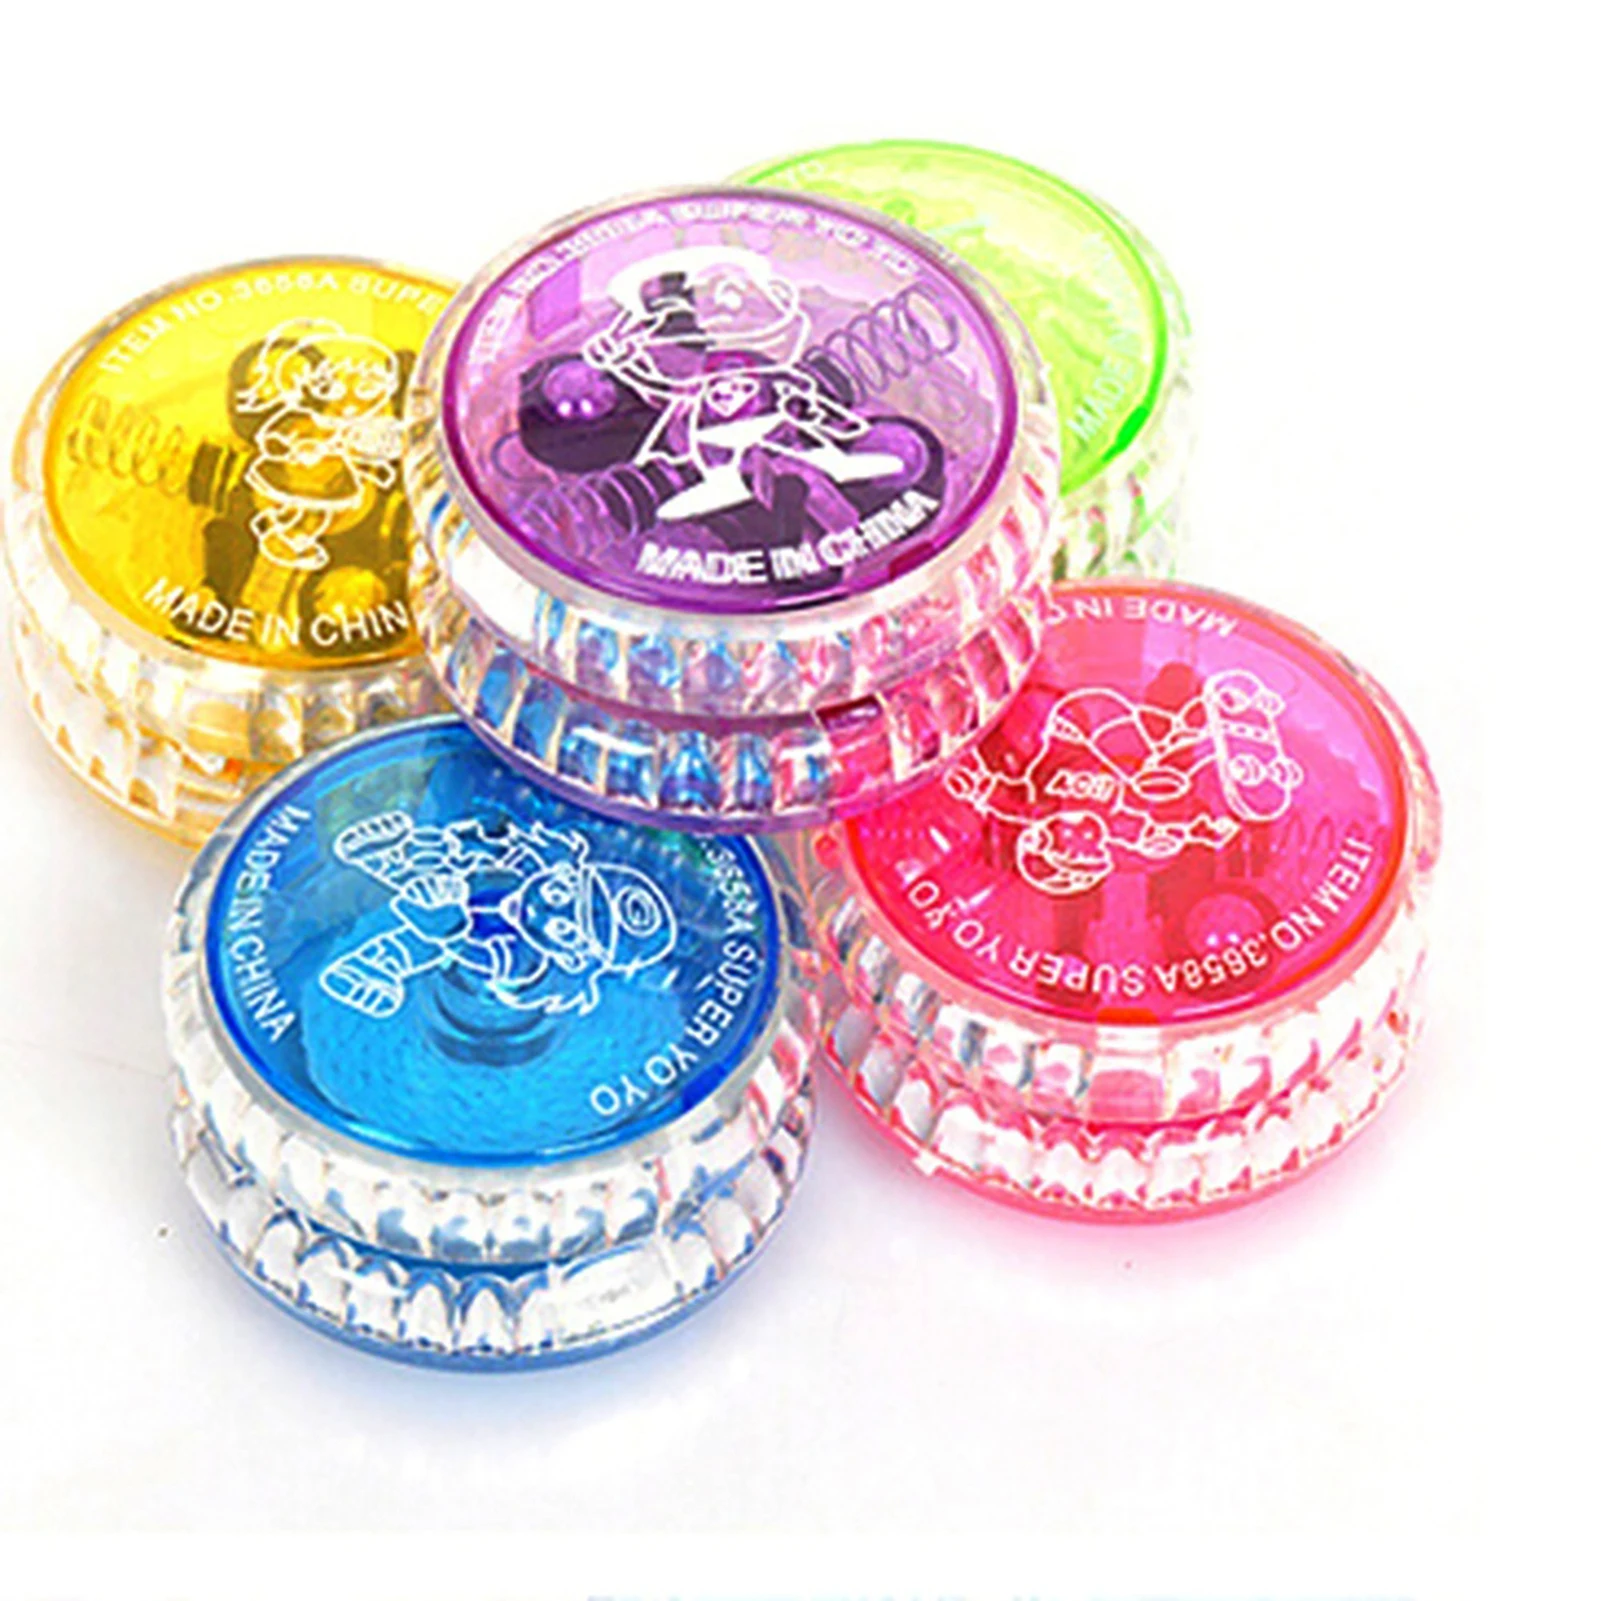 

Flashing Led Glow Light Up Yoyo Easy To Stabilize and Easy To Hang Yo-yo for Christmas and New Year Gift